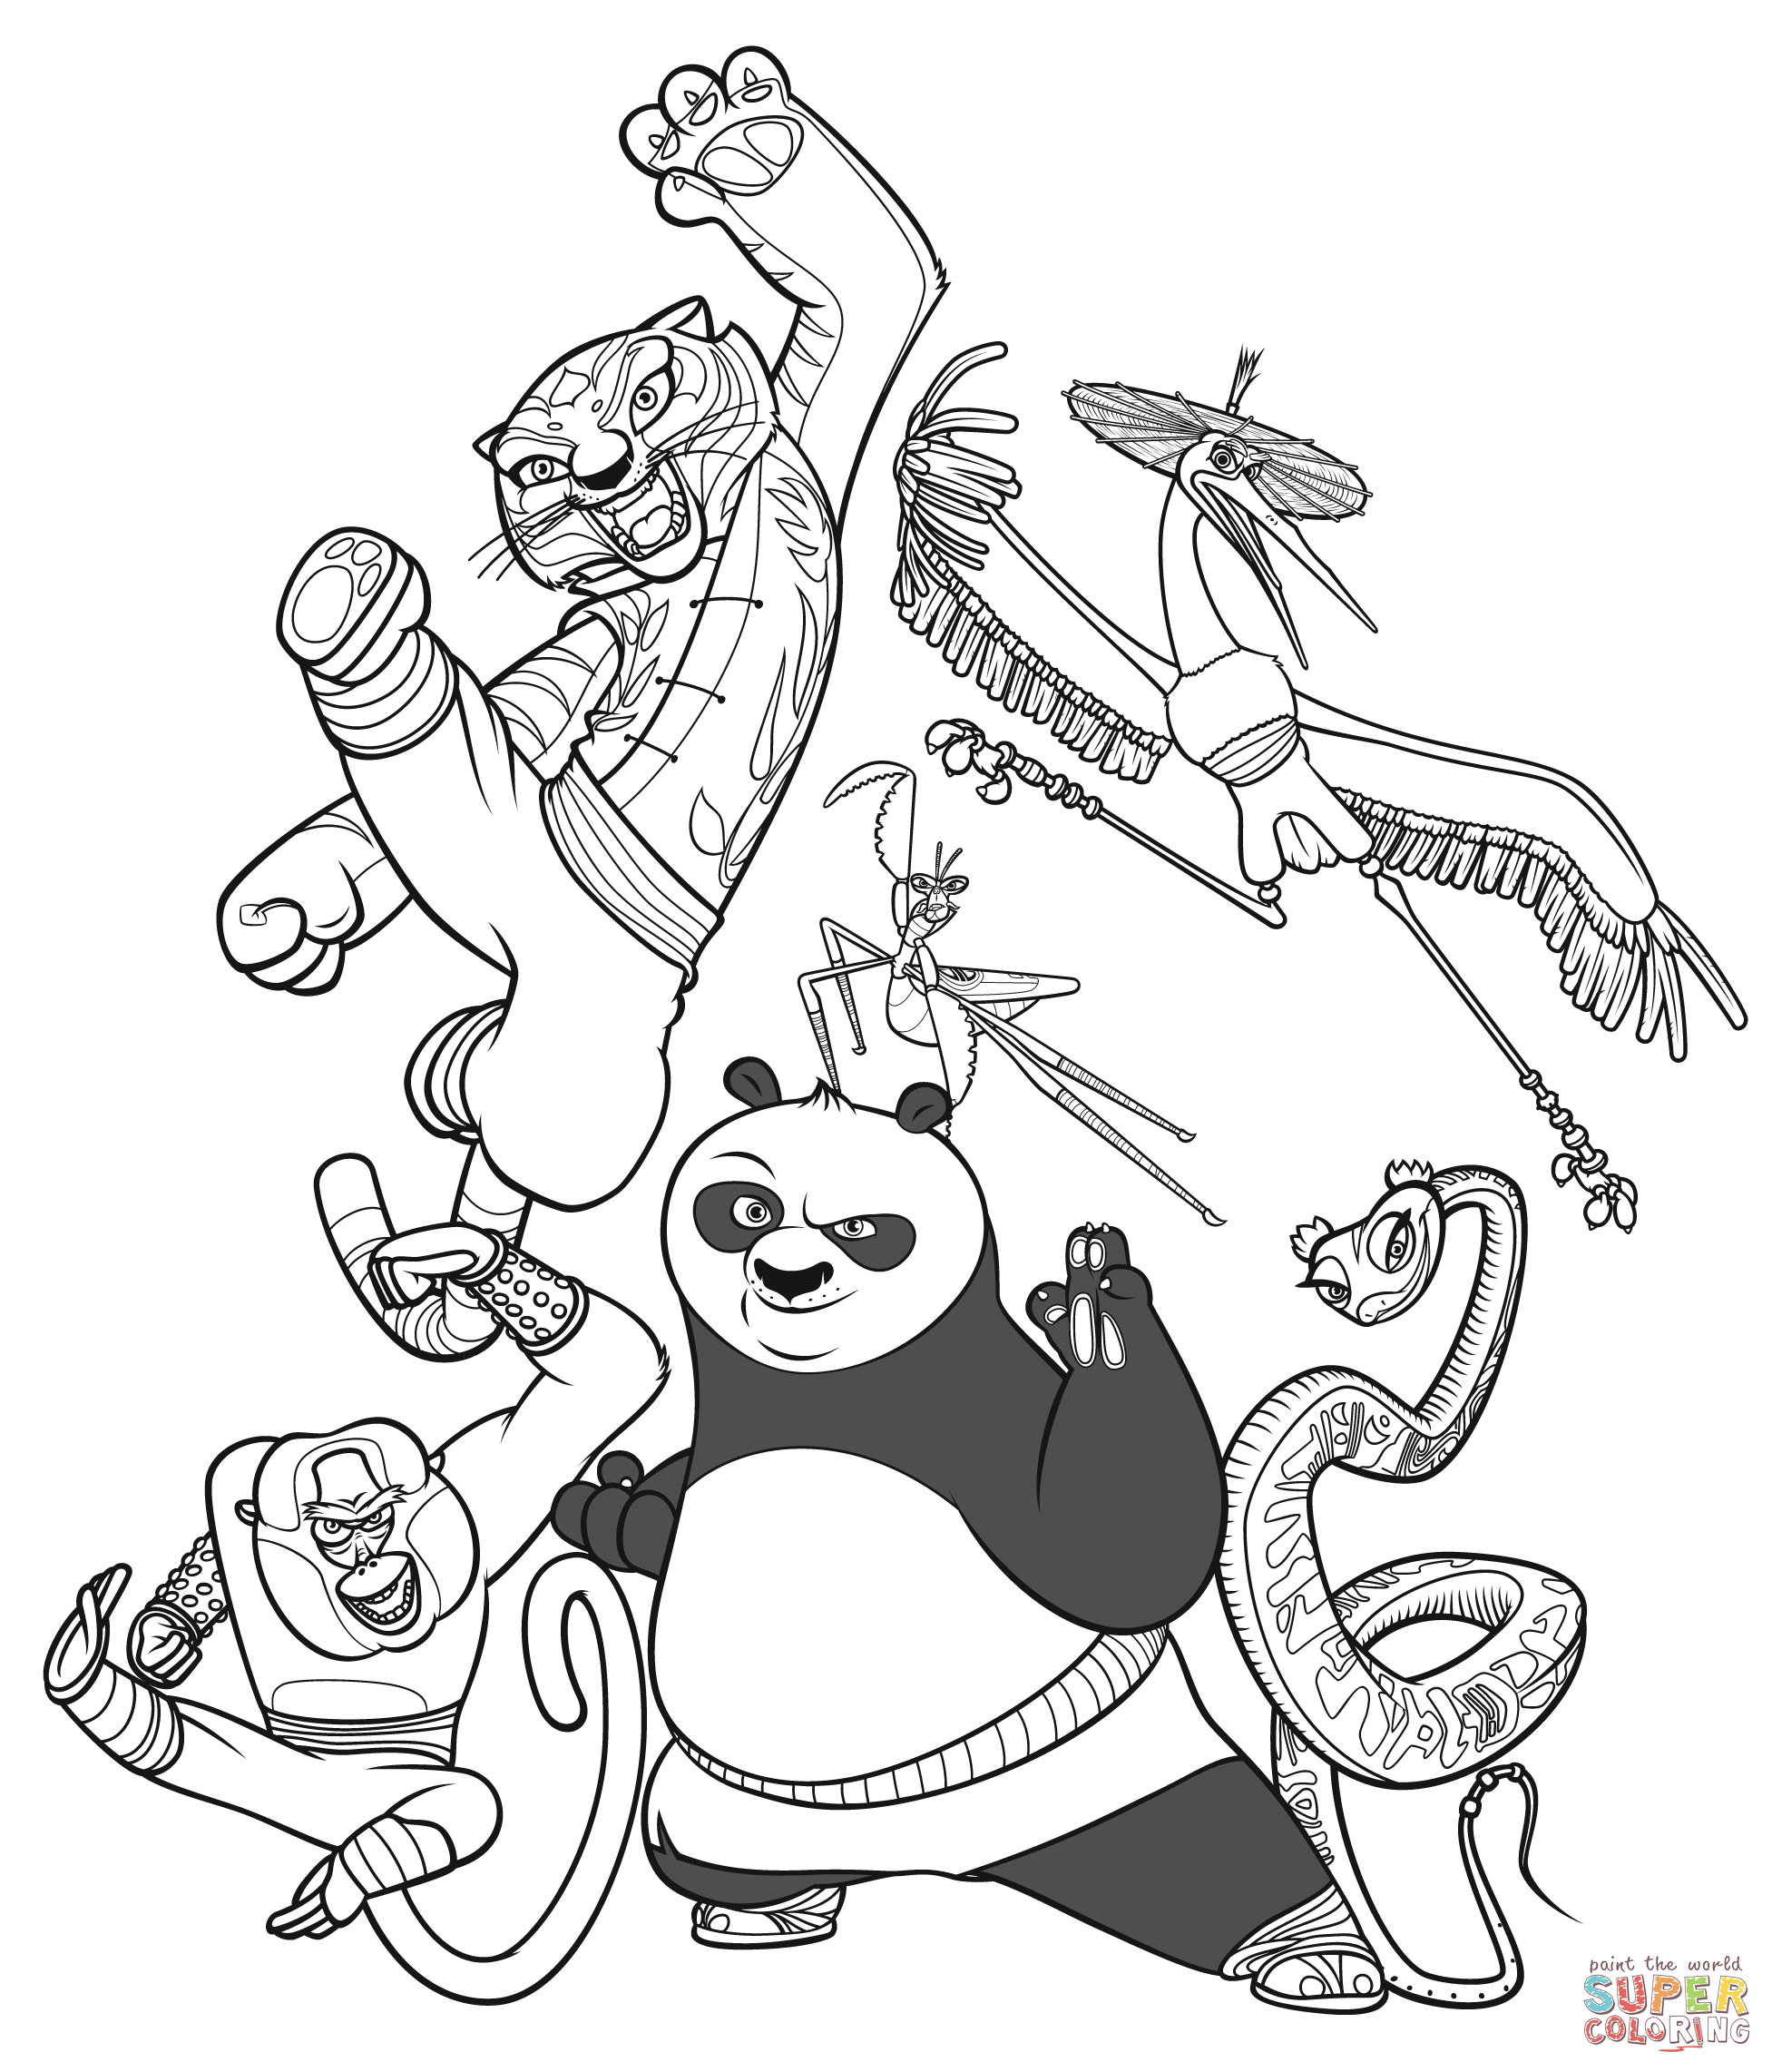 kung-fu-panda coloring pages,printable,coloring pages